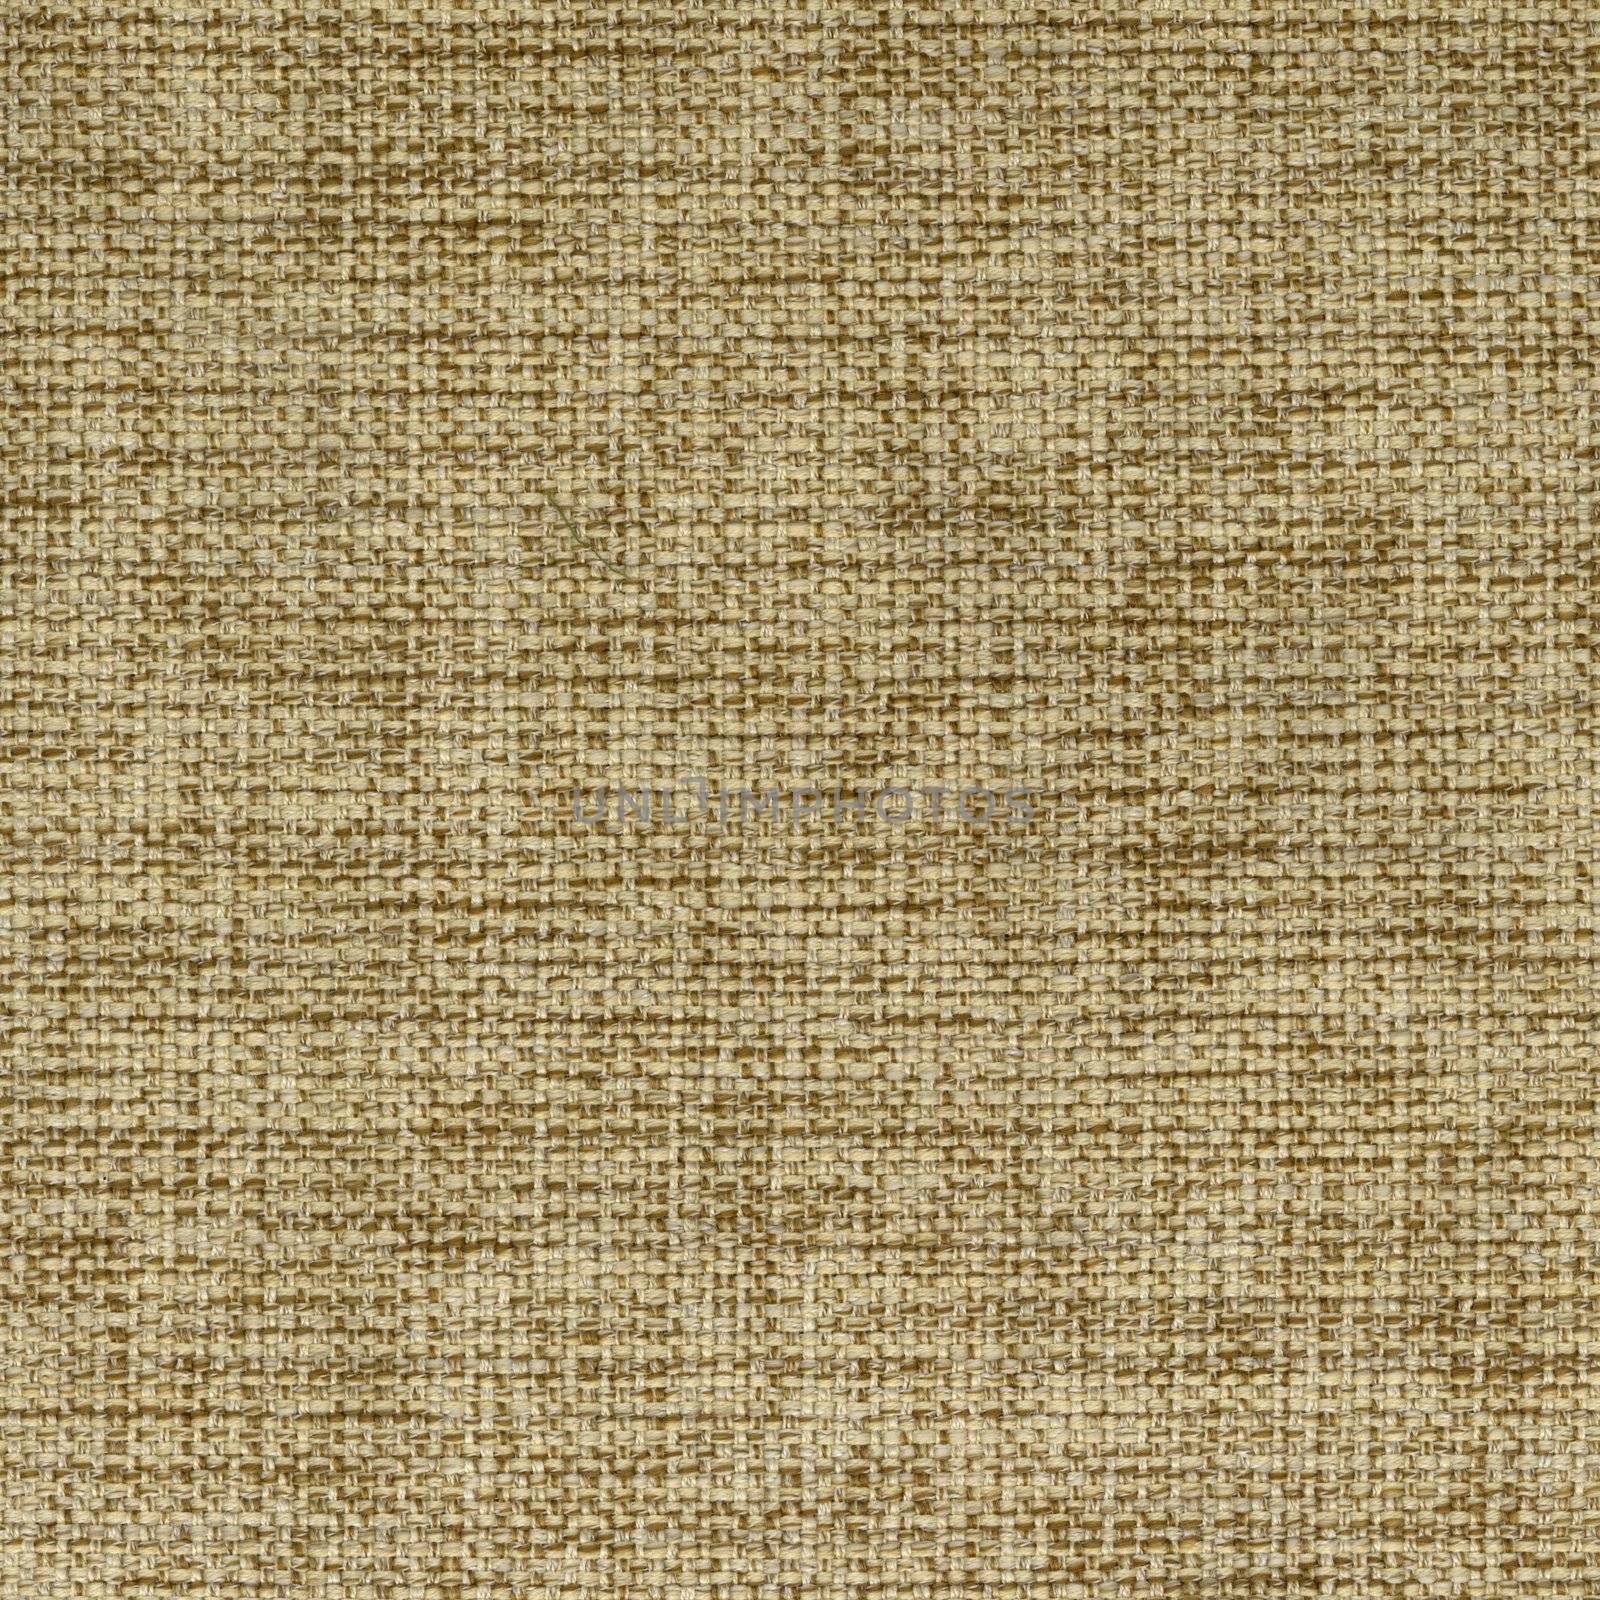 Brown Fabric Texture (High.res.scan) by mg1408